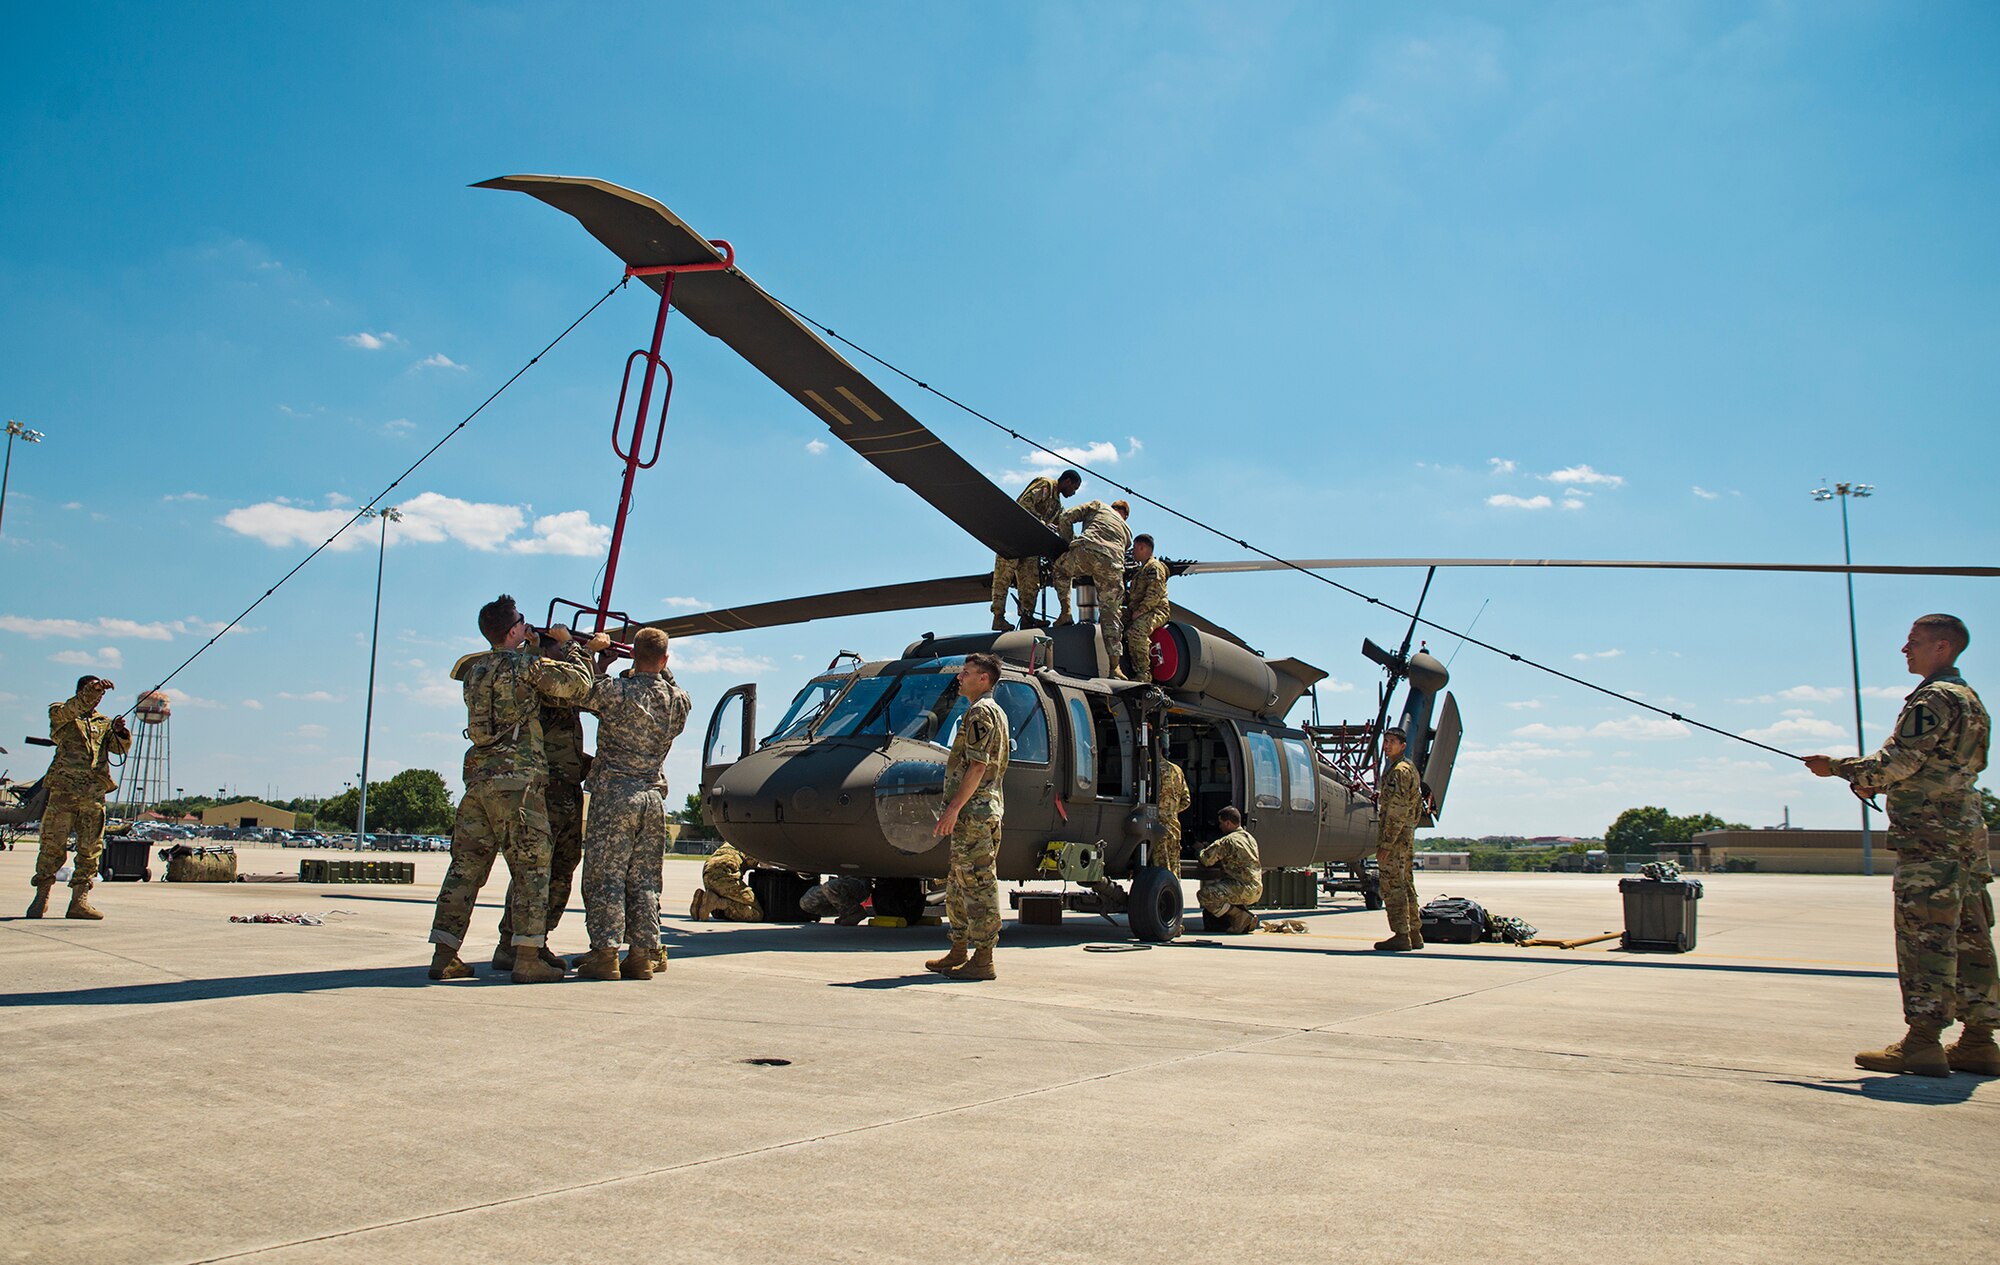 Soldiers from the 1st Calvary Division, 1st Air Combat Brigade, 615th Aviation Support Battalion from Ft. Hood, Texas remove the rotor blades from a UH-60 Black Hawk helicopter June 21, 2017 at Joint Base San Antonio-Lackland, Texas. Operation Silver Galaxy was a five-day training event that featured Airmen training Soldiers how to secure their aircraft for a deployment in the cargo area of a C-5M Super Galaxy. (U.S. Air Force photo by Benjamin Faske)